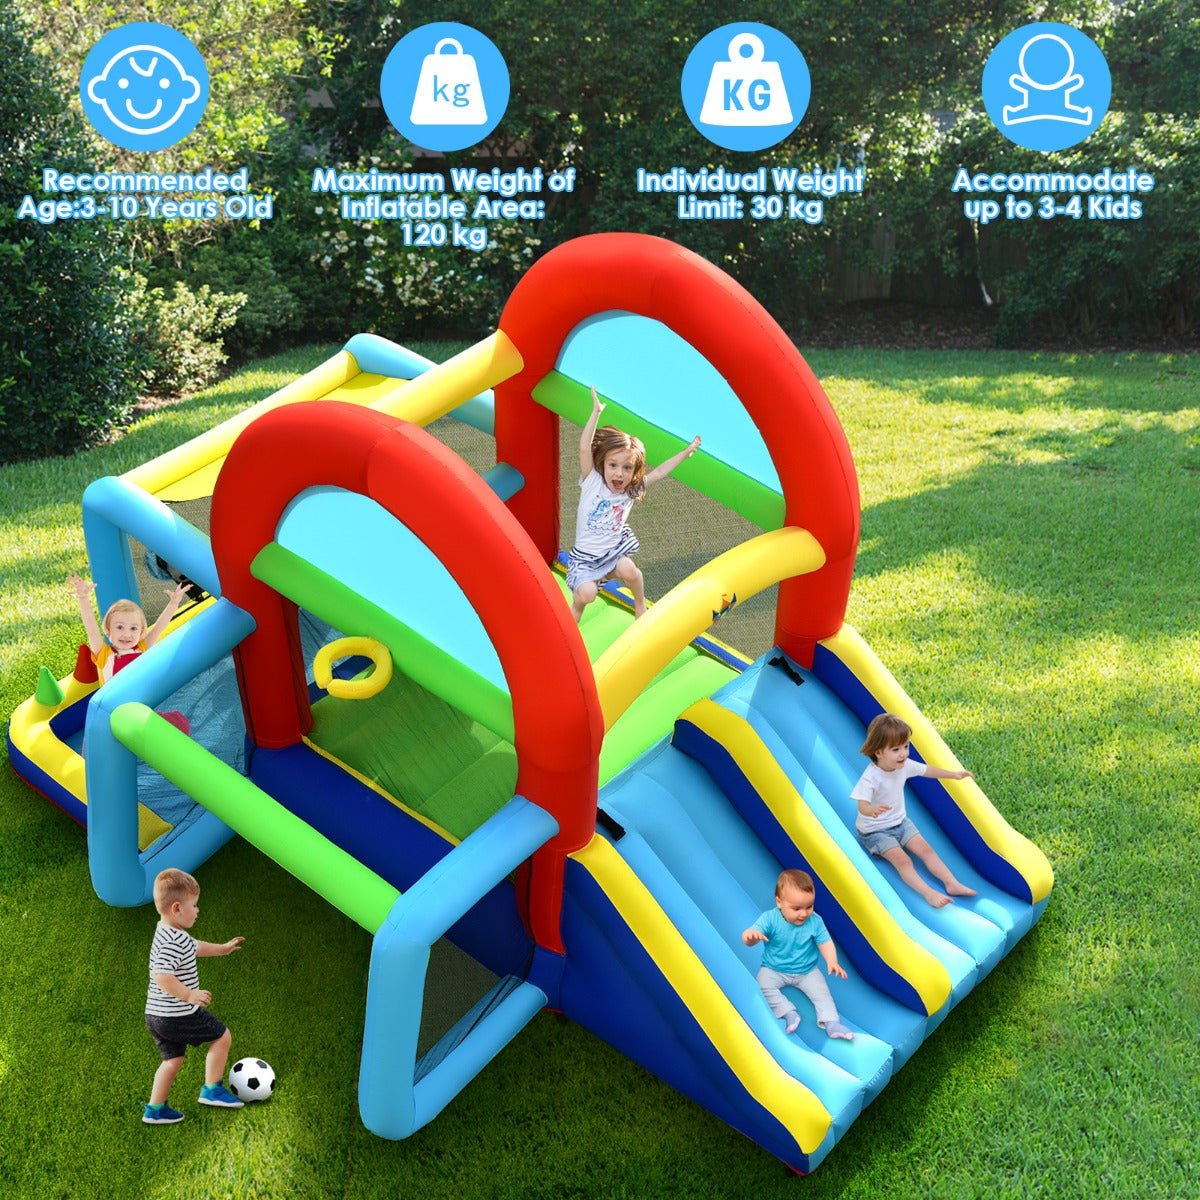 Kids Ultimate Adventure - Inflatable Bounce House with Dual Slides (Blower Included)